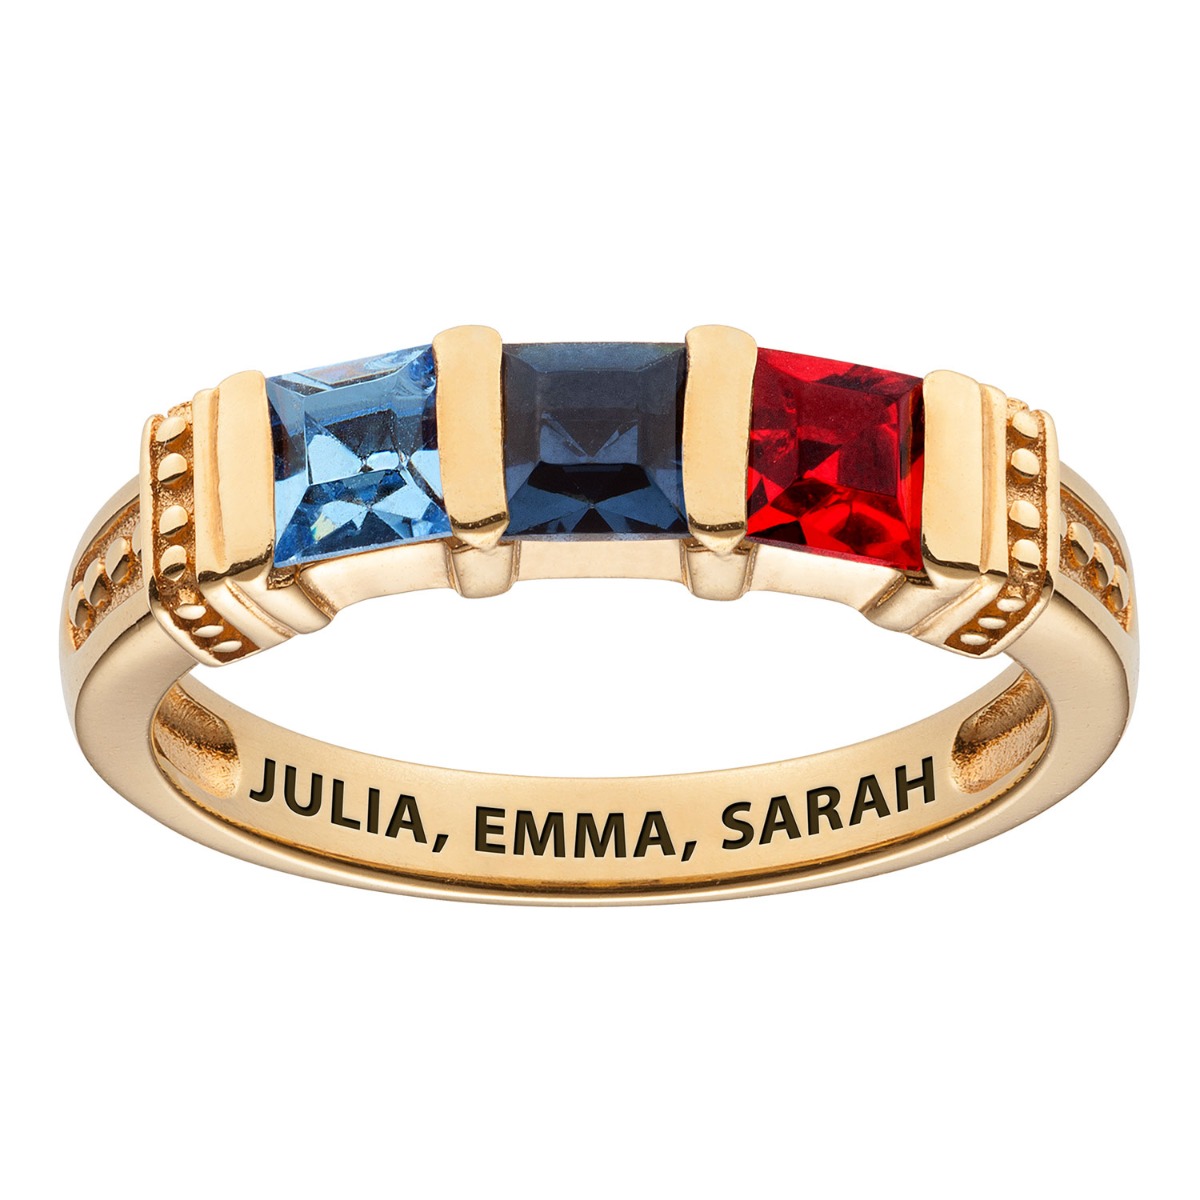 10K Yellow Gold Square Family Birthstone Ring - 3 Stones